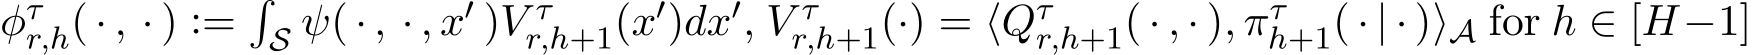  φτr,h( · , · ) :=�S ψ( · , · , x′ )V τr,h+1(x′)dx′, V τr,h+1(·) = ⟨Qτr,h+1( · , · ), πτh+1( · | · )⟩A for h ∈ [H−1]